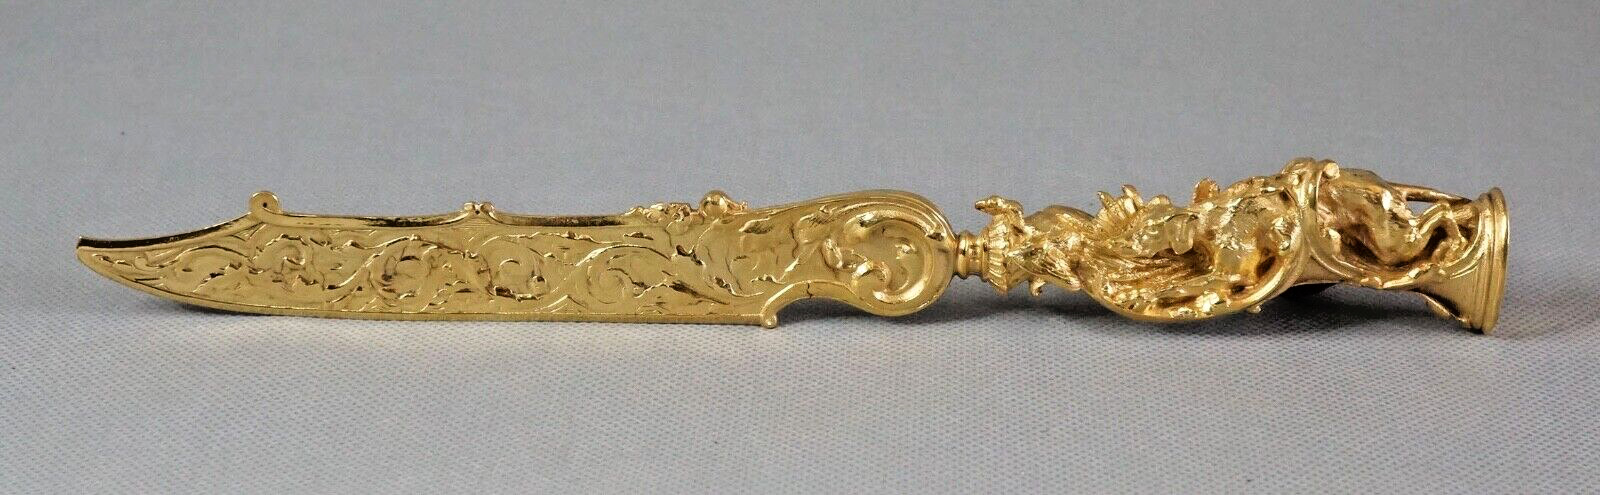 19c.Antique French Palais Royal Ormolu Bronze Letter Opener Wax Seal Hunting Dog